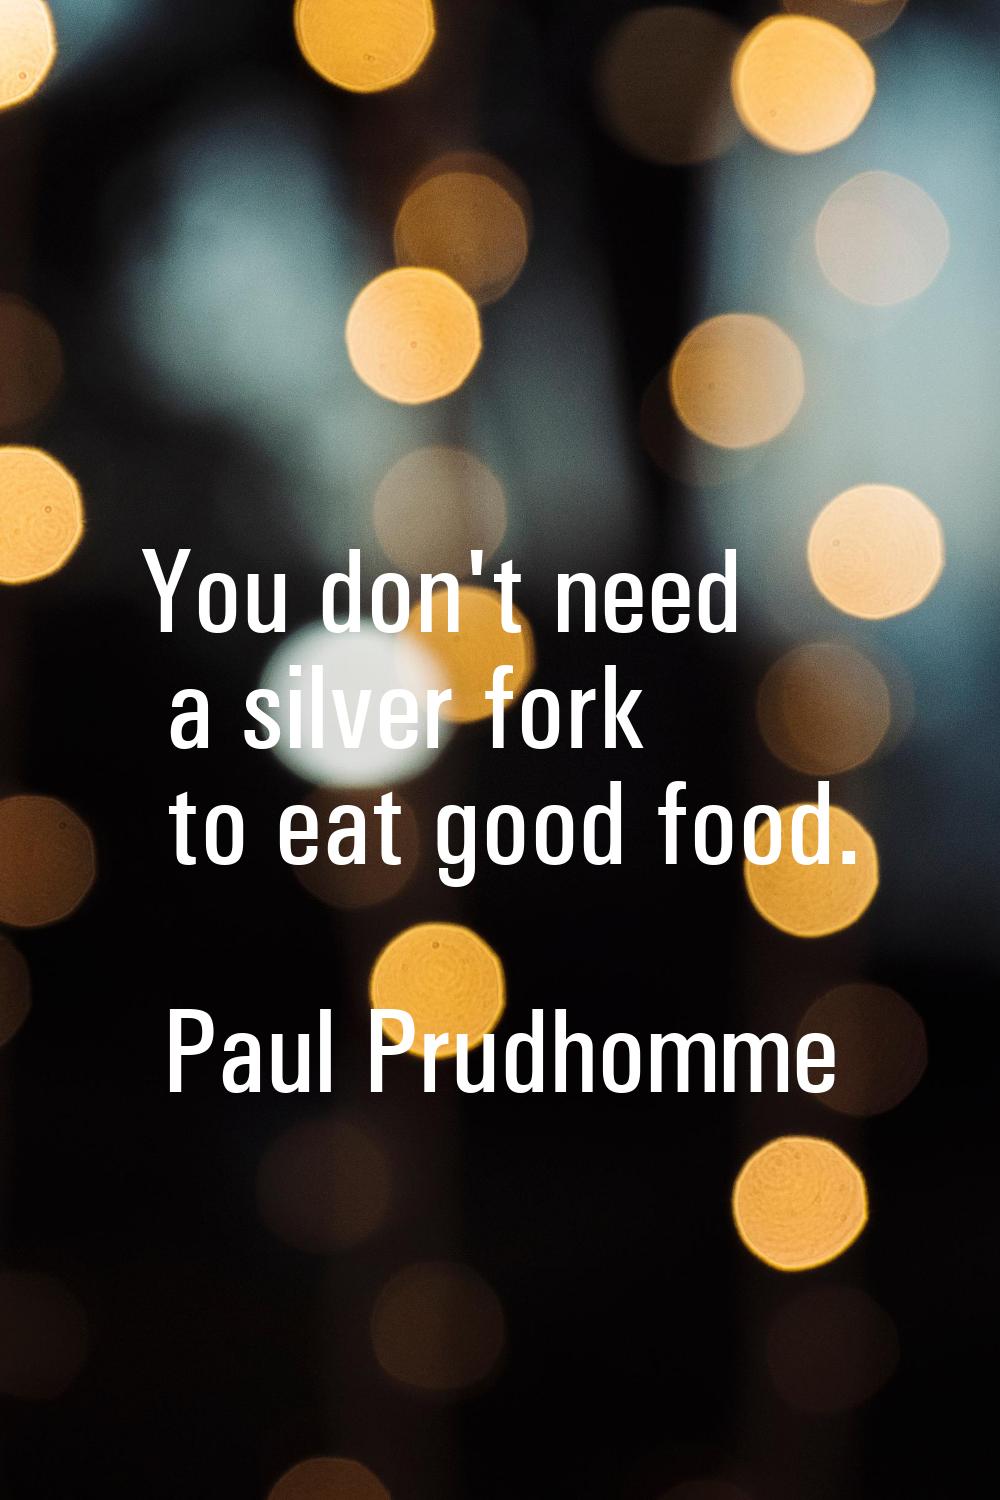 You don't need a silver fork to eat good food.